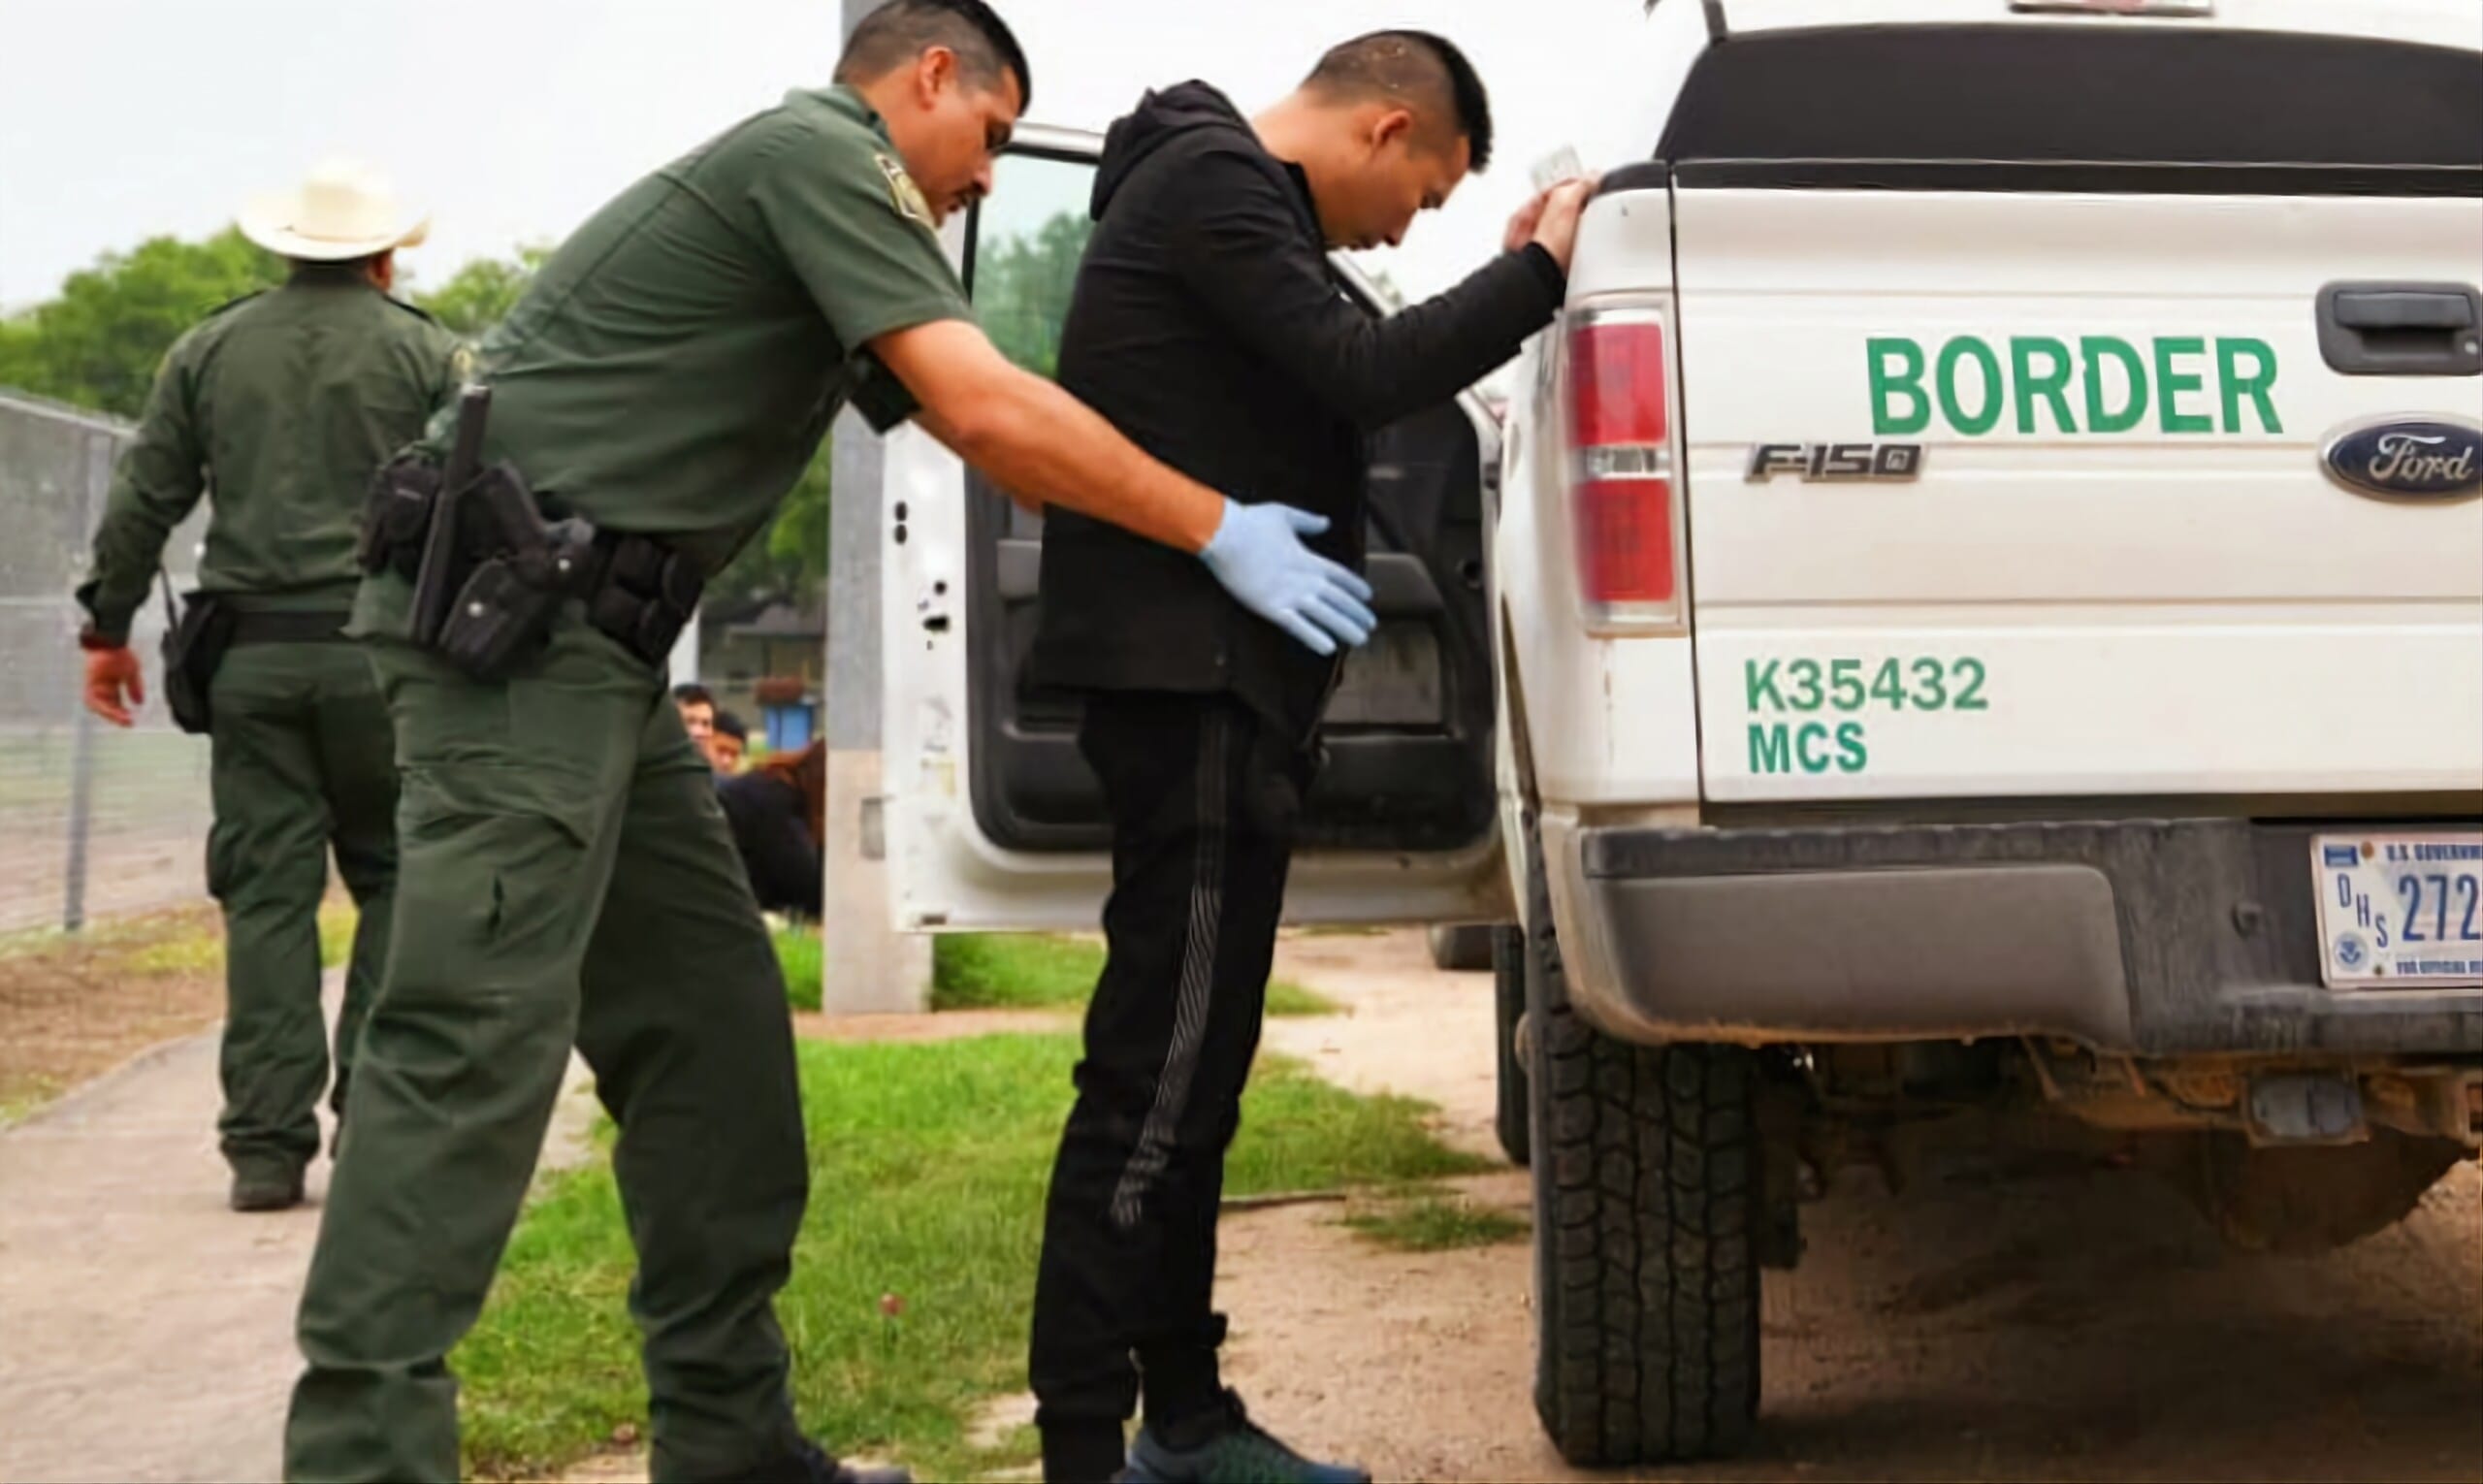 The law is authorized to detain immigrants with a history of theft